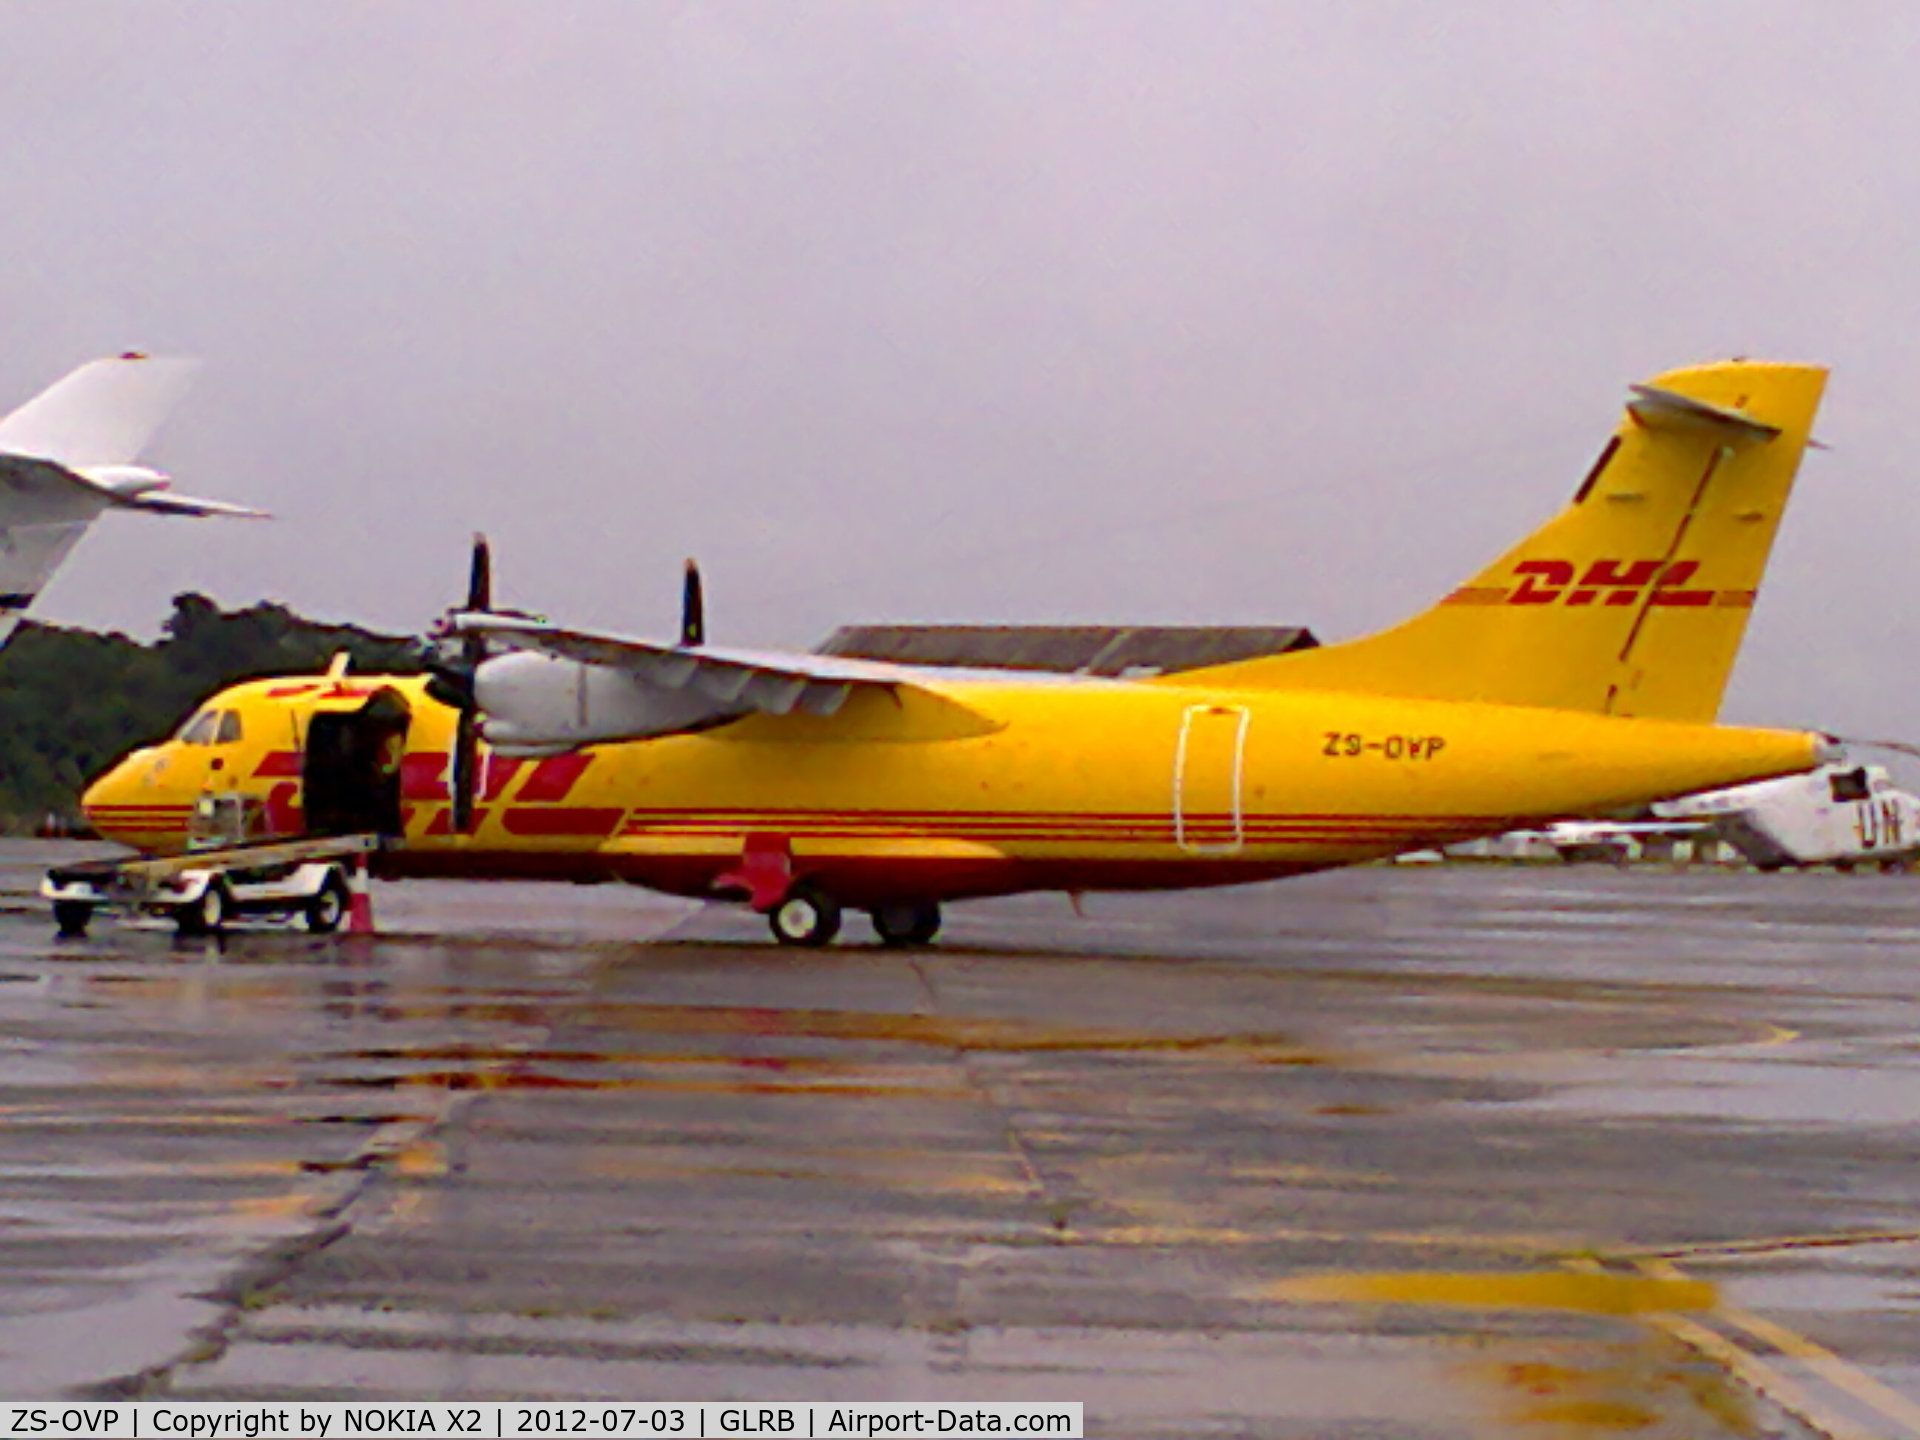 ZS-OVP, 1988 ATR 42-300 C/N 088, FLYING FOR DHL